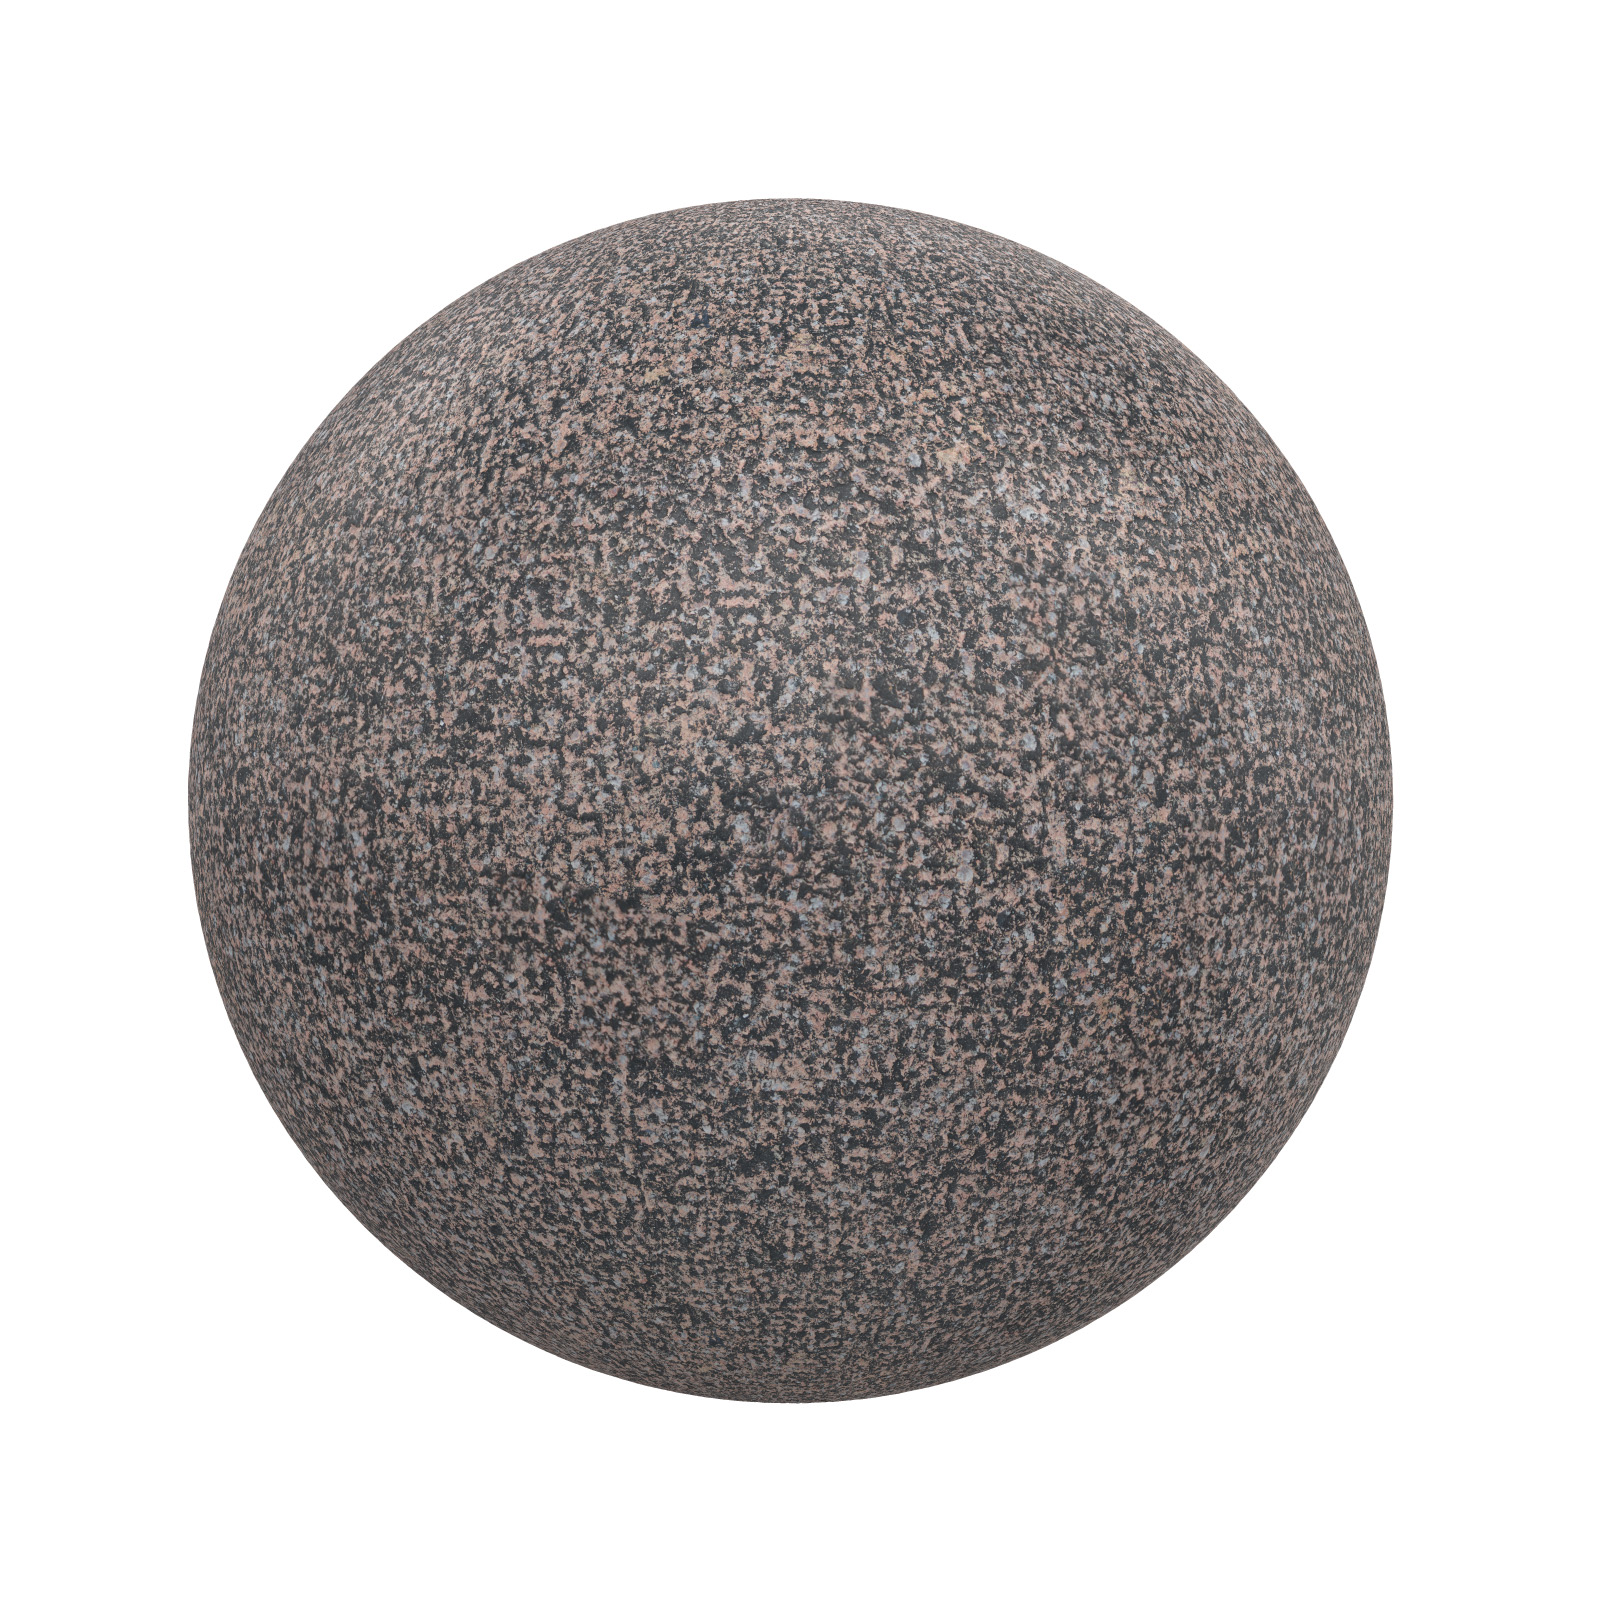 TEXTURES – STONES – CGAxis PBR Colection Vol 1 Stones – rend and black granite - thumbnail 1